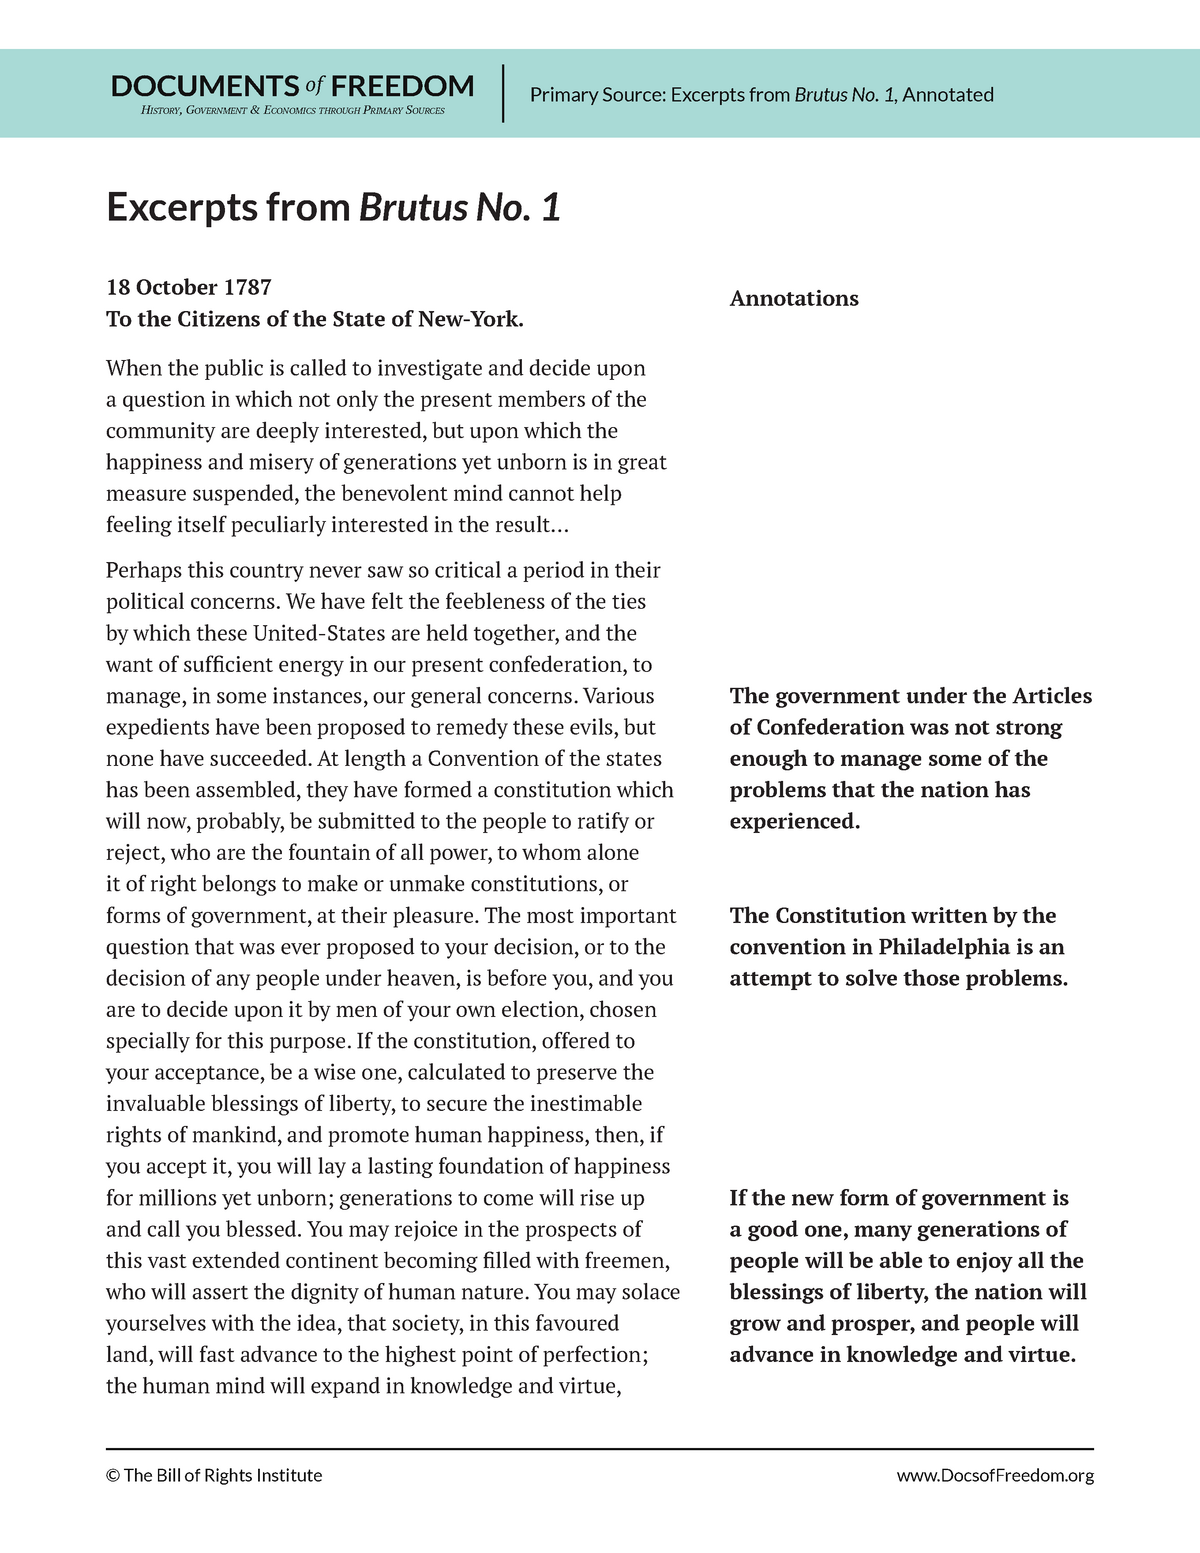 thesis for brutus 1